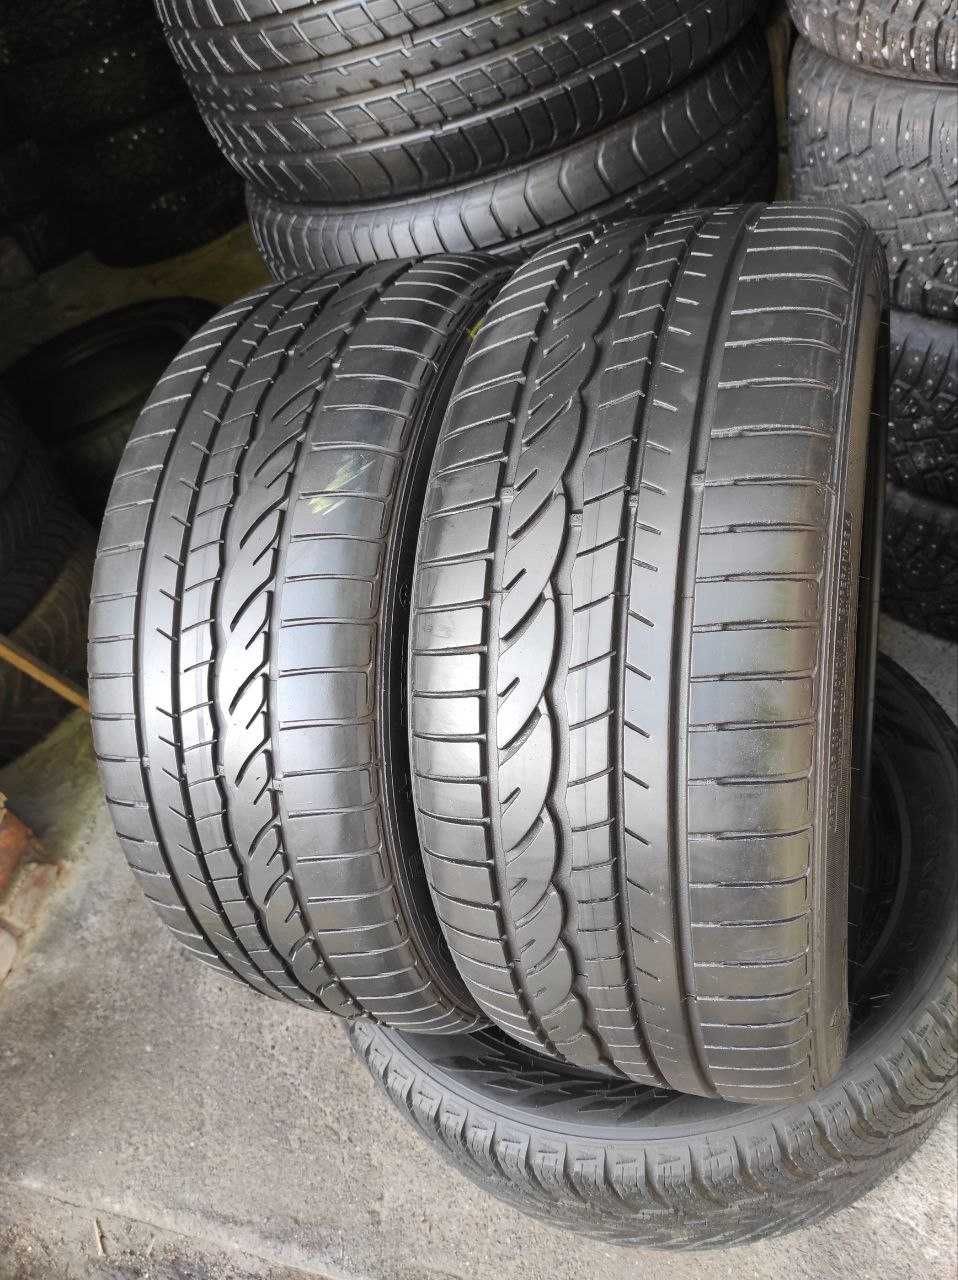 Dunlop SP Sport 01 A 225/45r17 made in Germany 2шт, 6-6,3мм, ЛЕТО